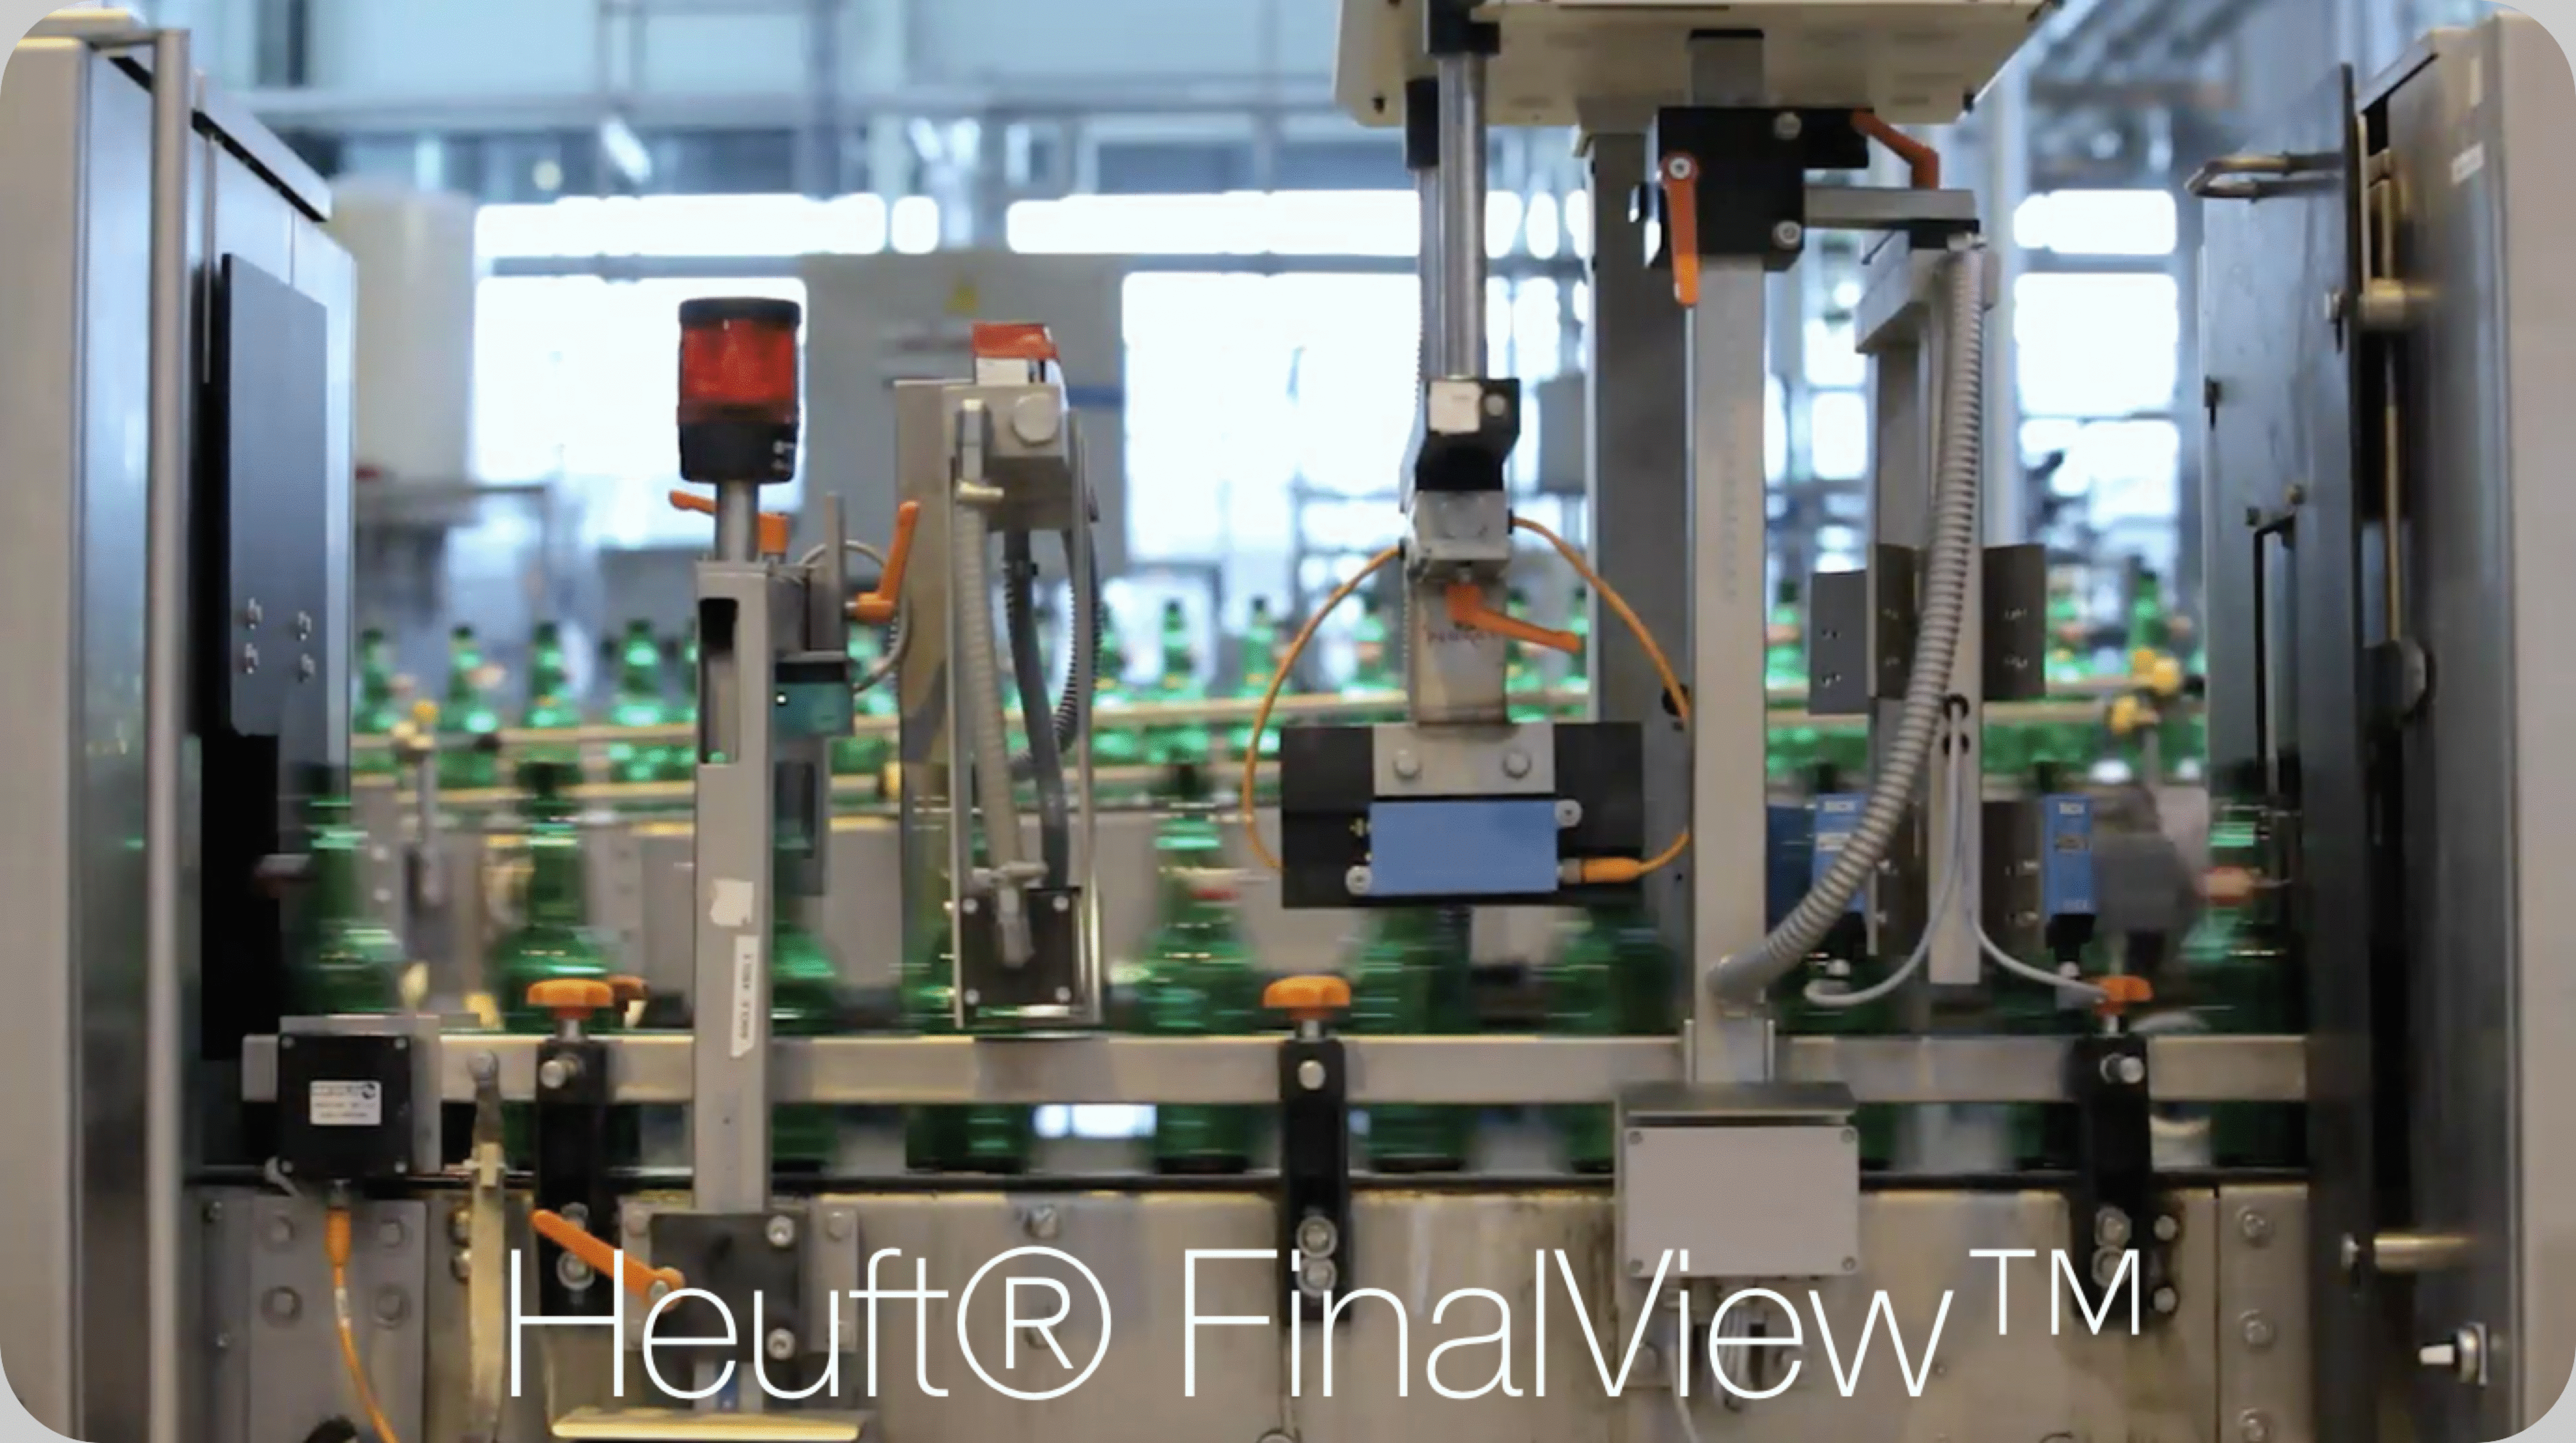 InLine and FinalView VISION at Grolsch Brewery.  HEUFT FinalView™ Final Containers Check  

Course delivered by HEUFT staff and attended in the HEUFT factory at Burgbrohl, Germany, 3 days, advanced level 